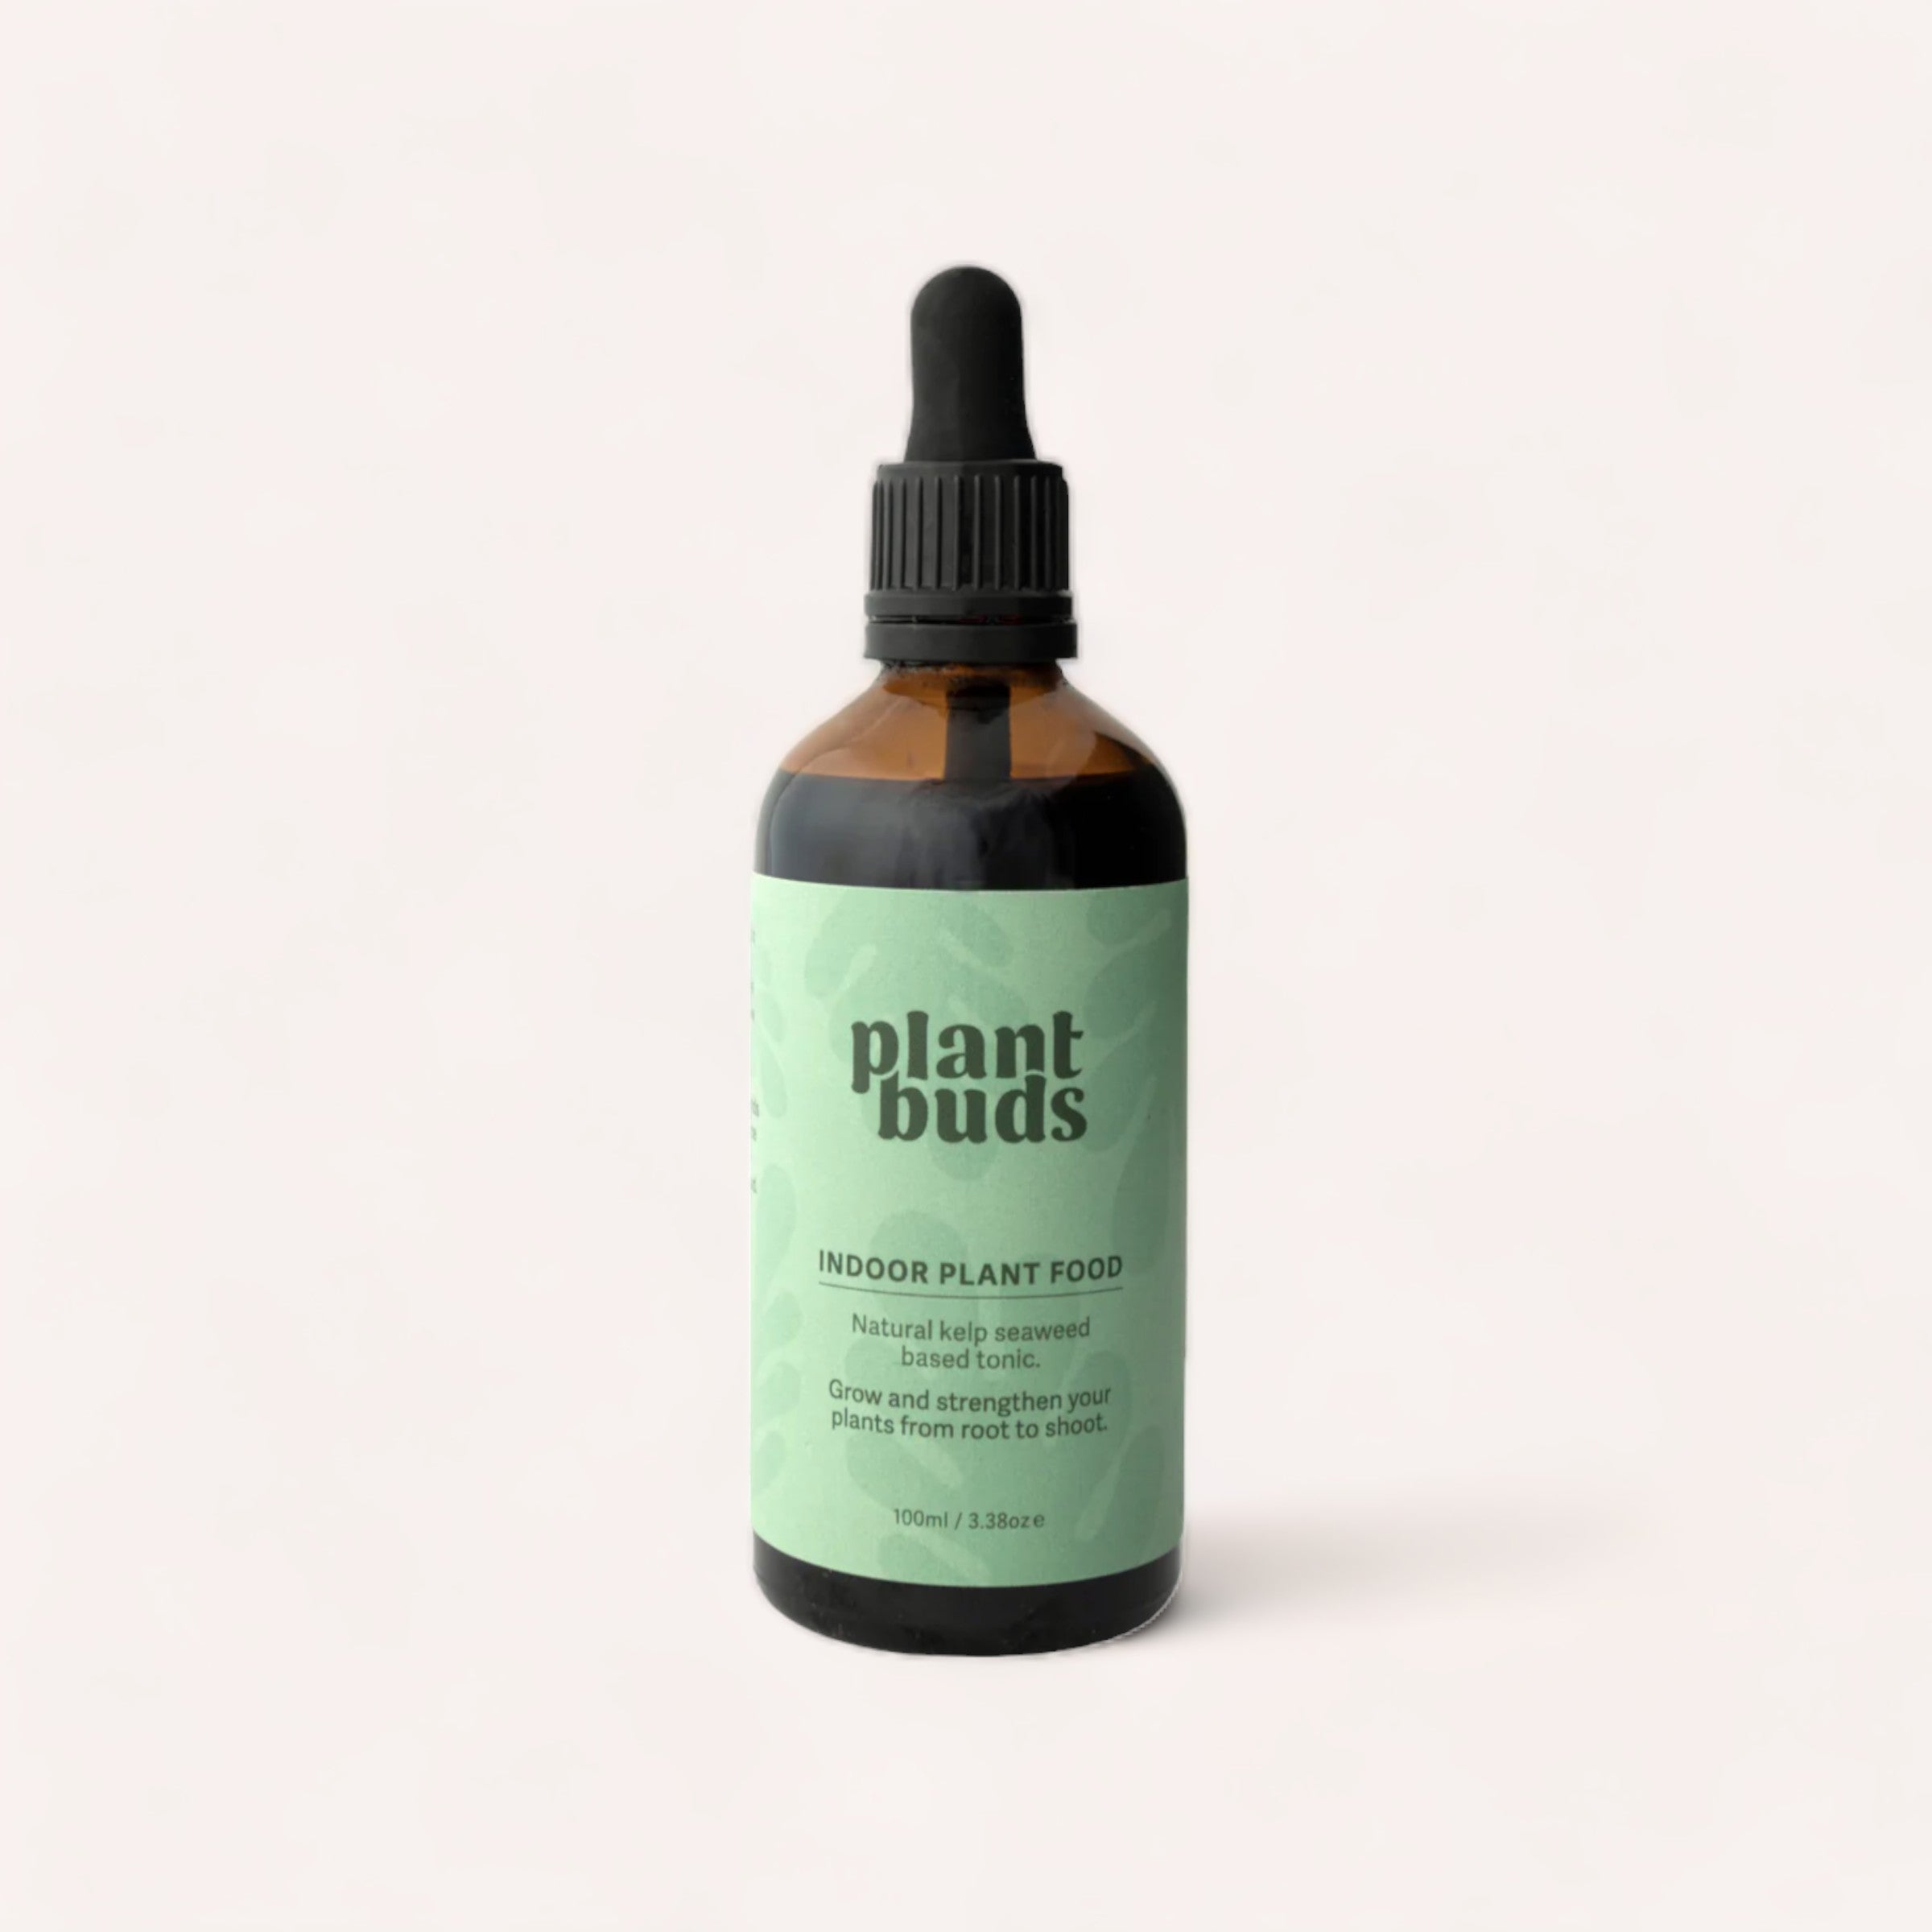 A bottle of "Indoor Plant Food by Plantbuds" with a dropper, designed to nurture and strengthen indoor plants, placed against a plain white background.